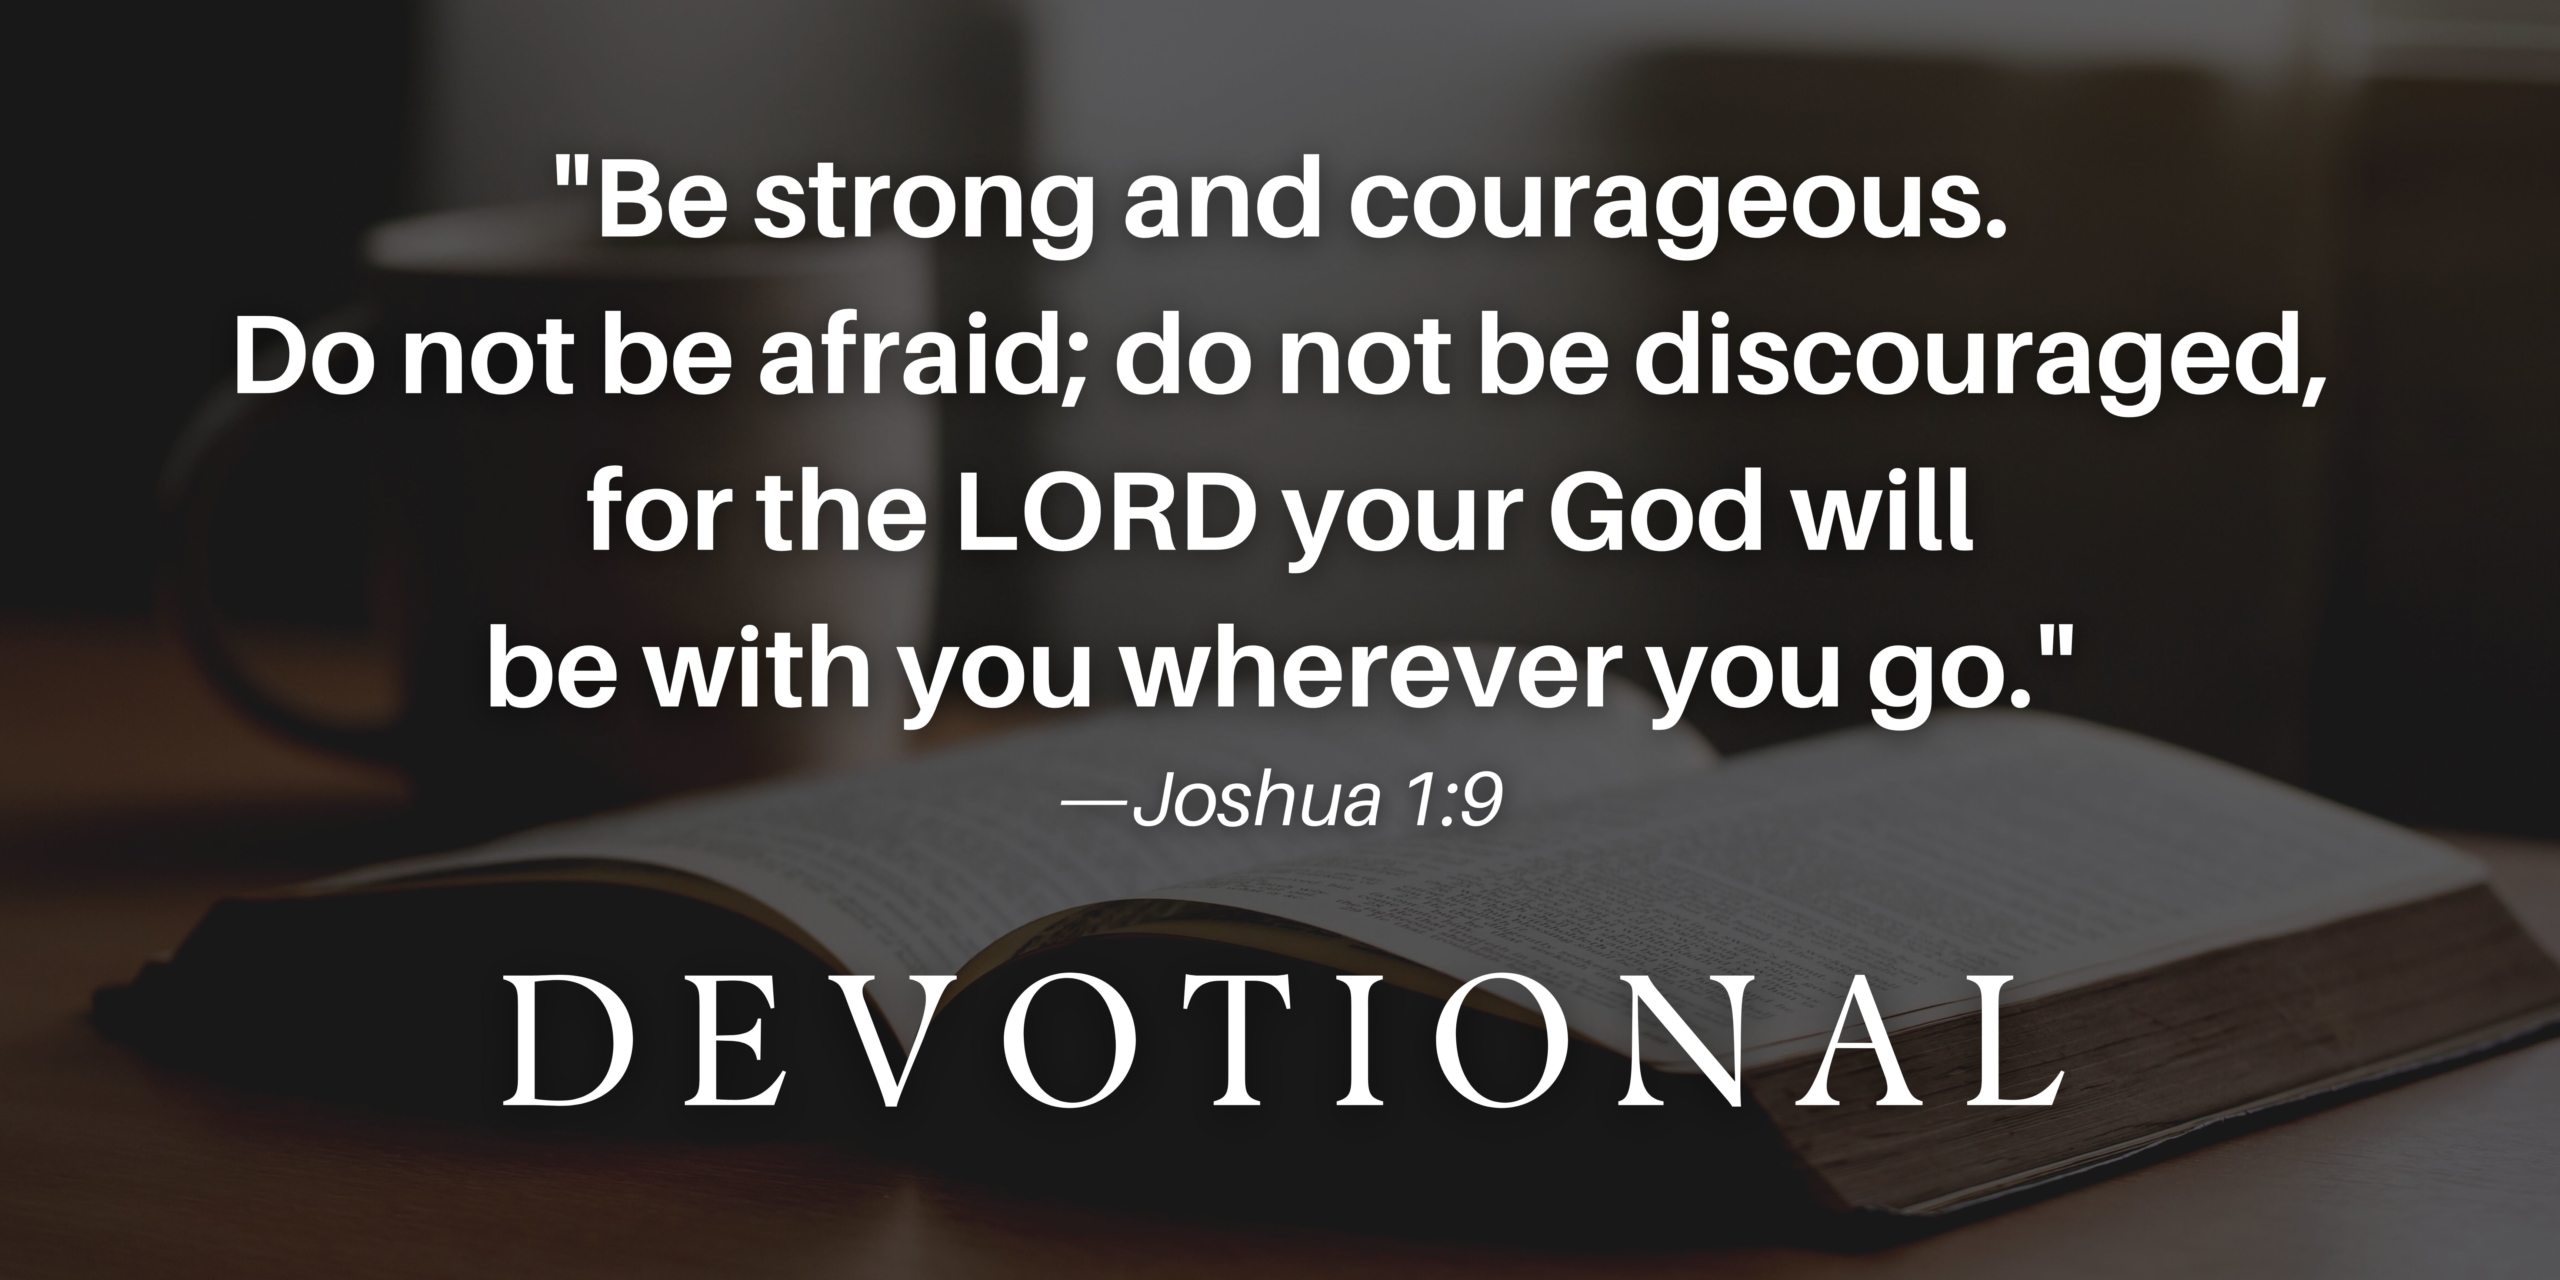 "Be strong and courageous. Do not be afraid; do not be discouraged, for the LORD your God will be with you wherever you go.” - Joshua 1:9